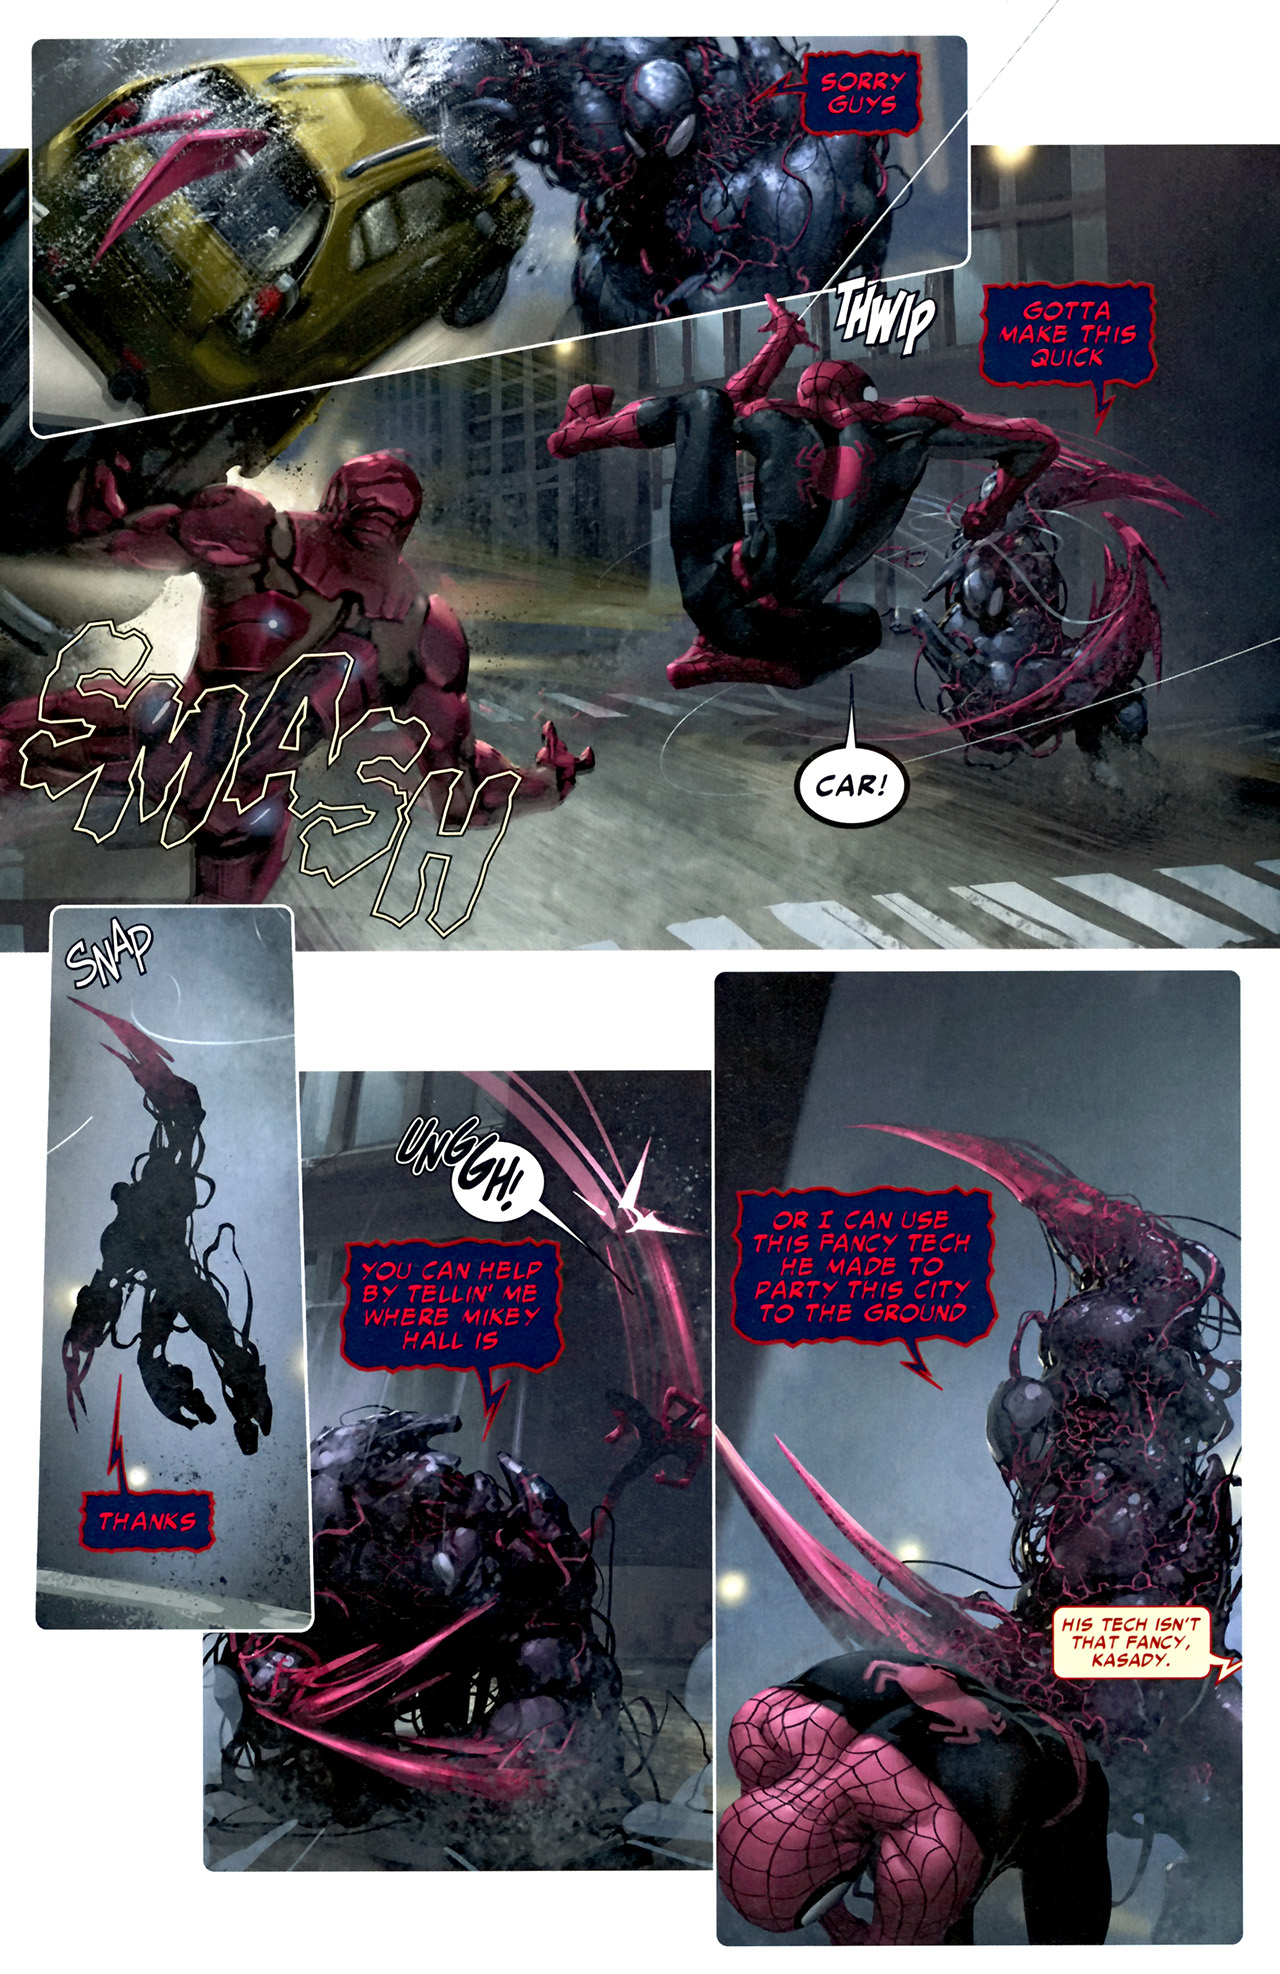 Carnage 5 of 5